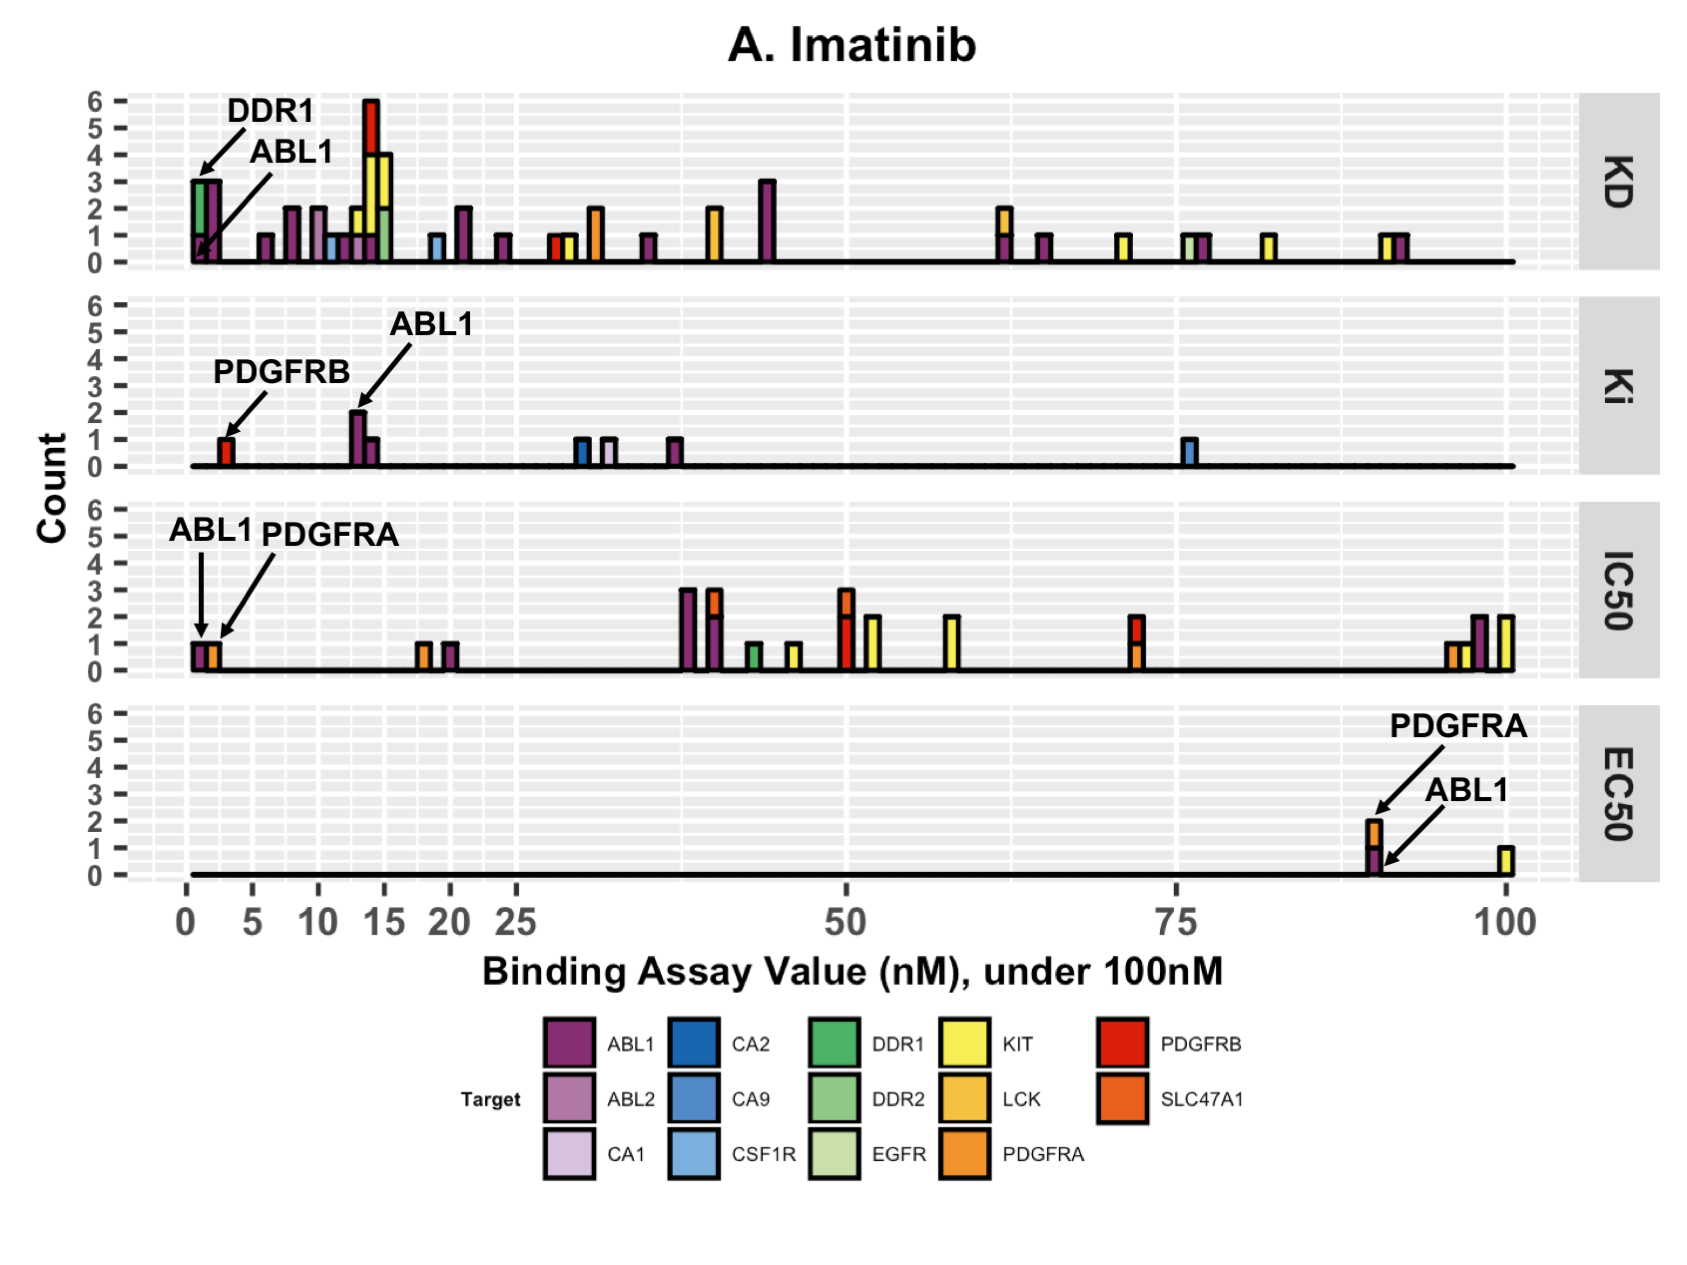 Figure 1. Imatinib Target Interactions with Binding Evidence <100nM